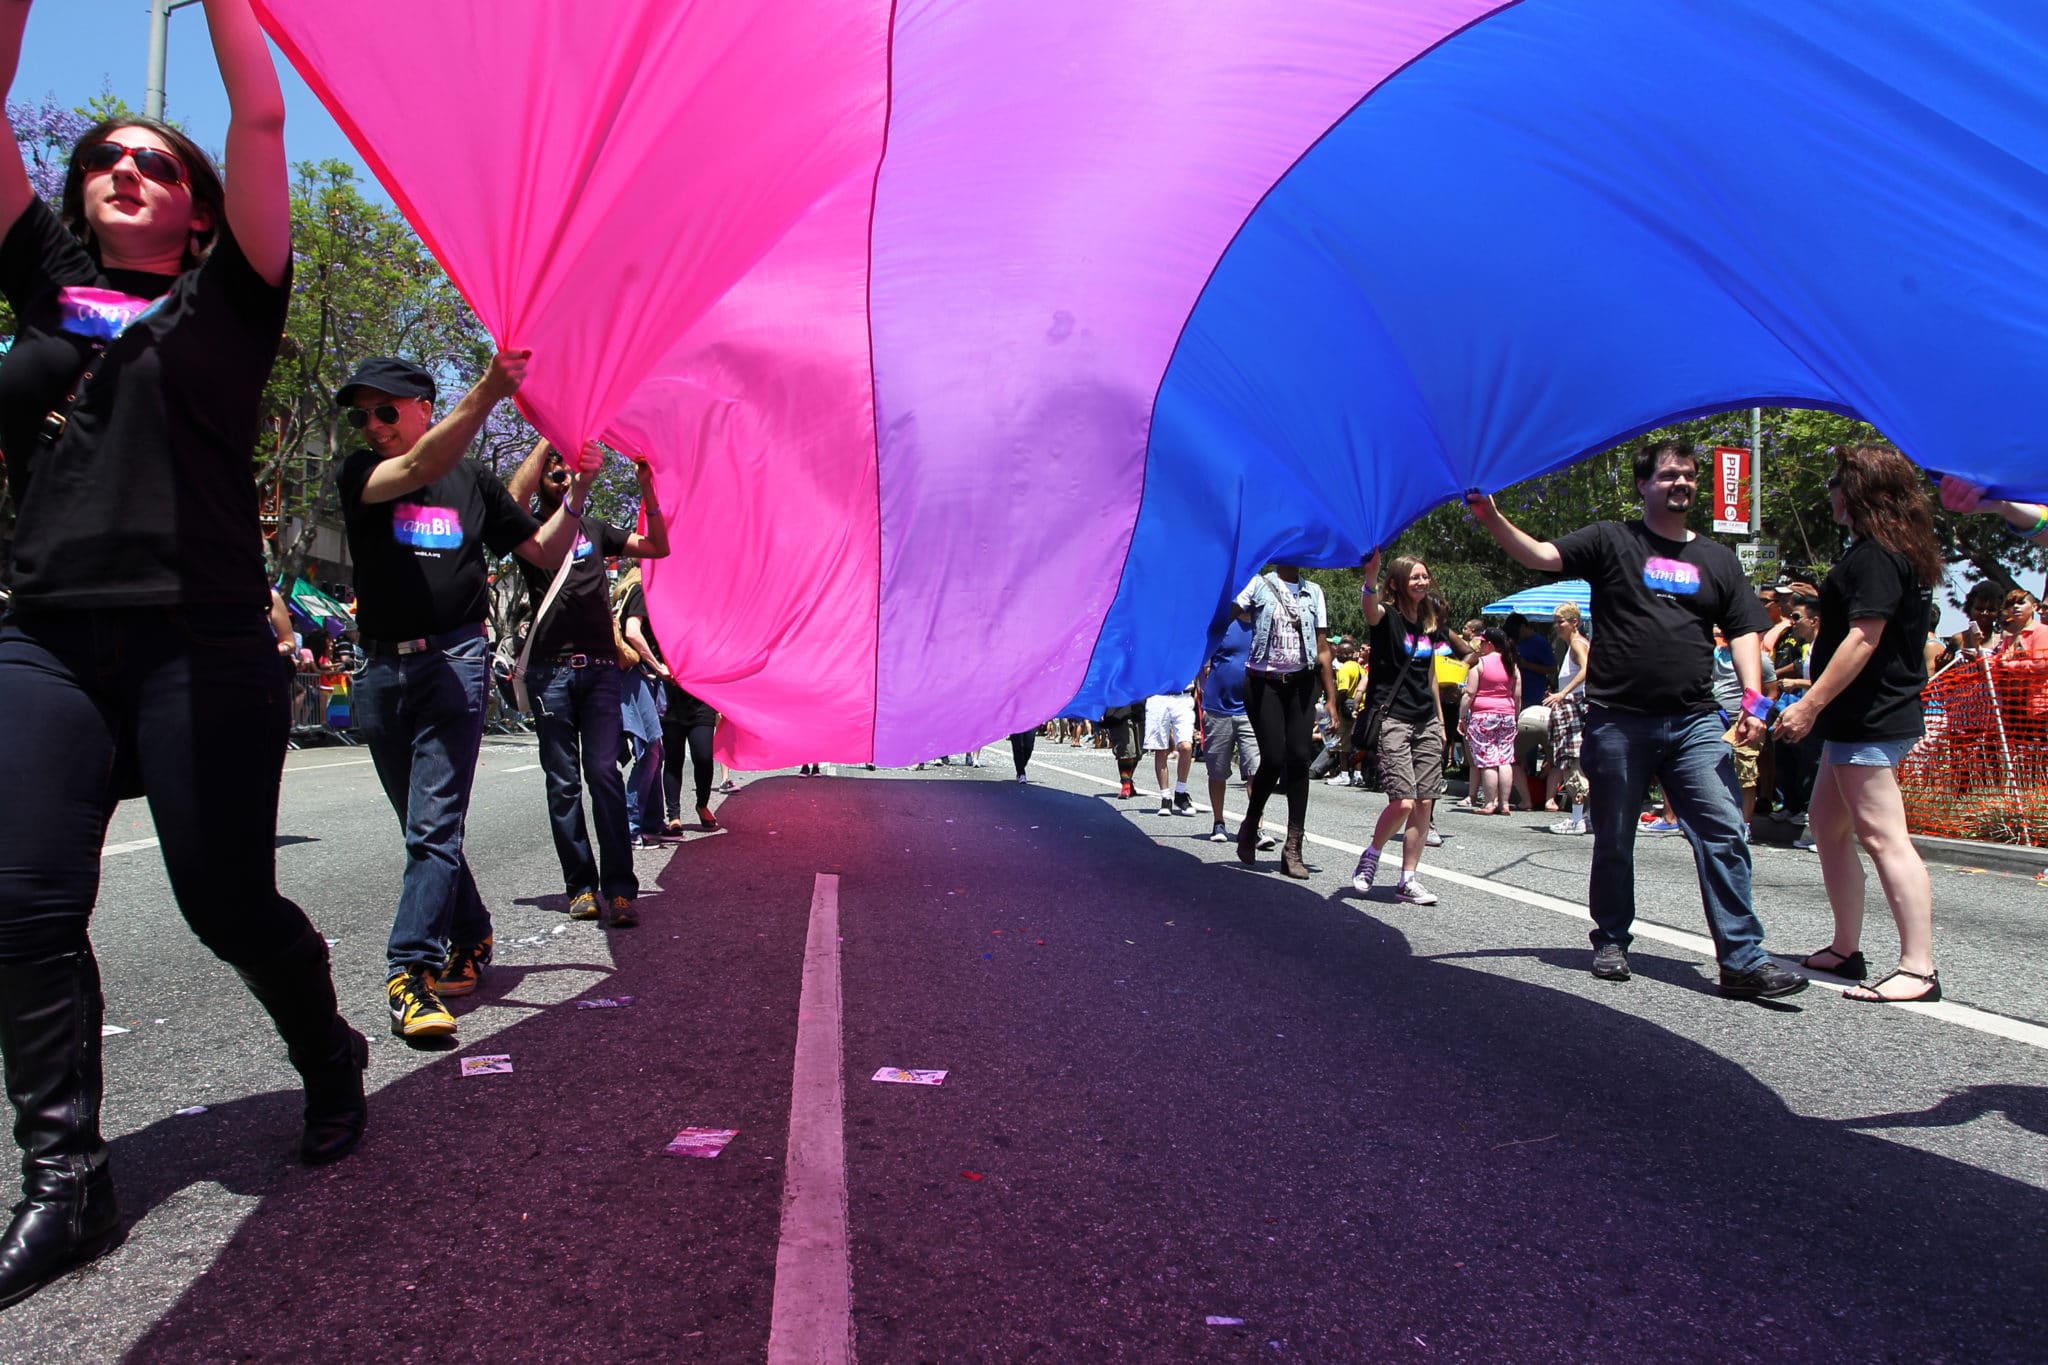 People marching with anBi, a bisexual organization, carry a bisexual flag in the LA Pride Parade 